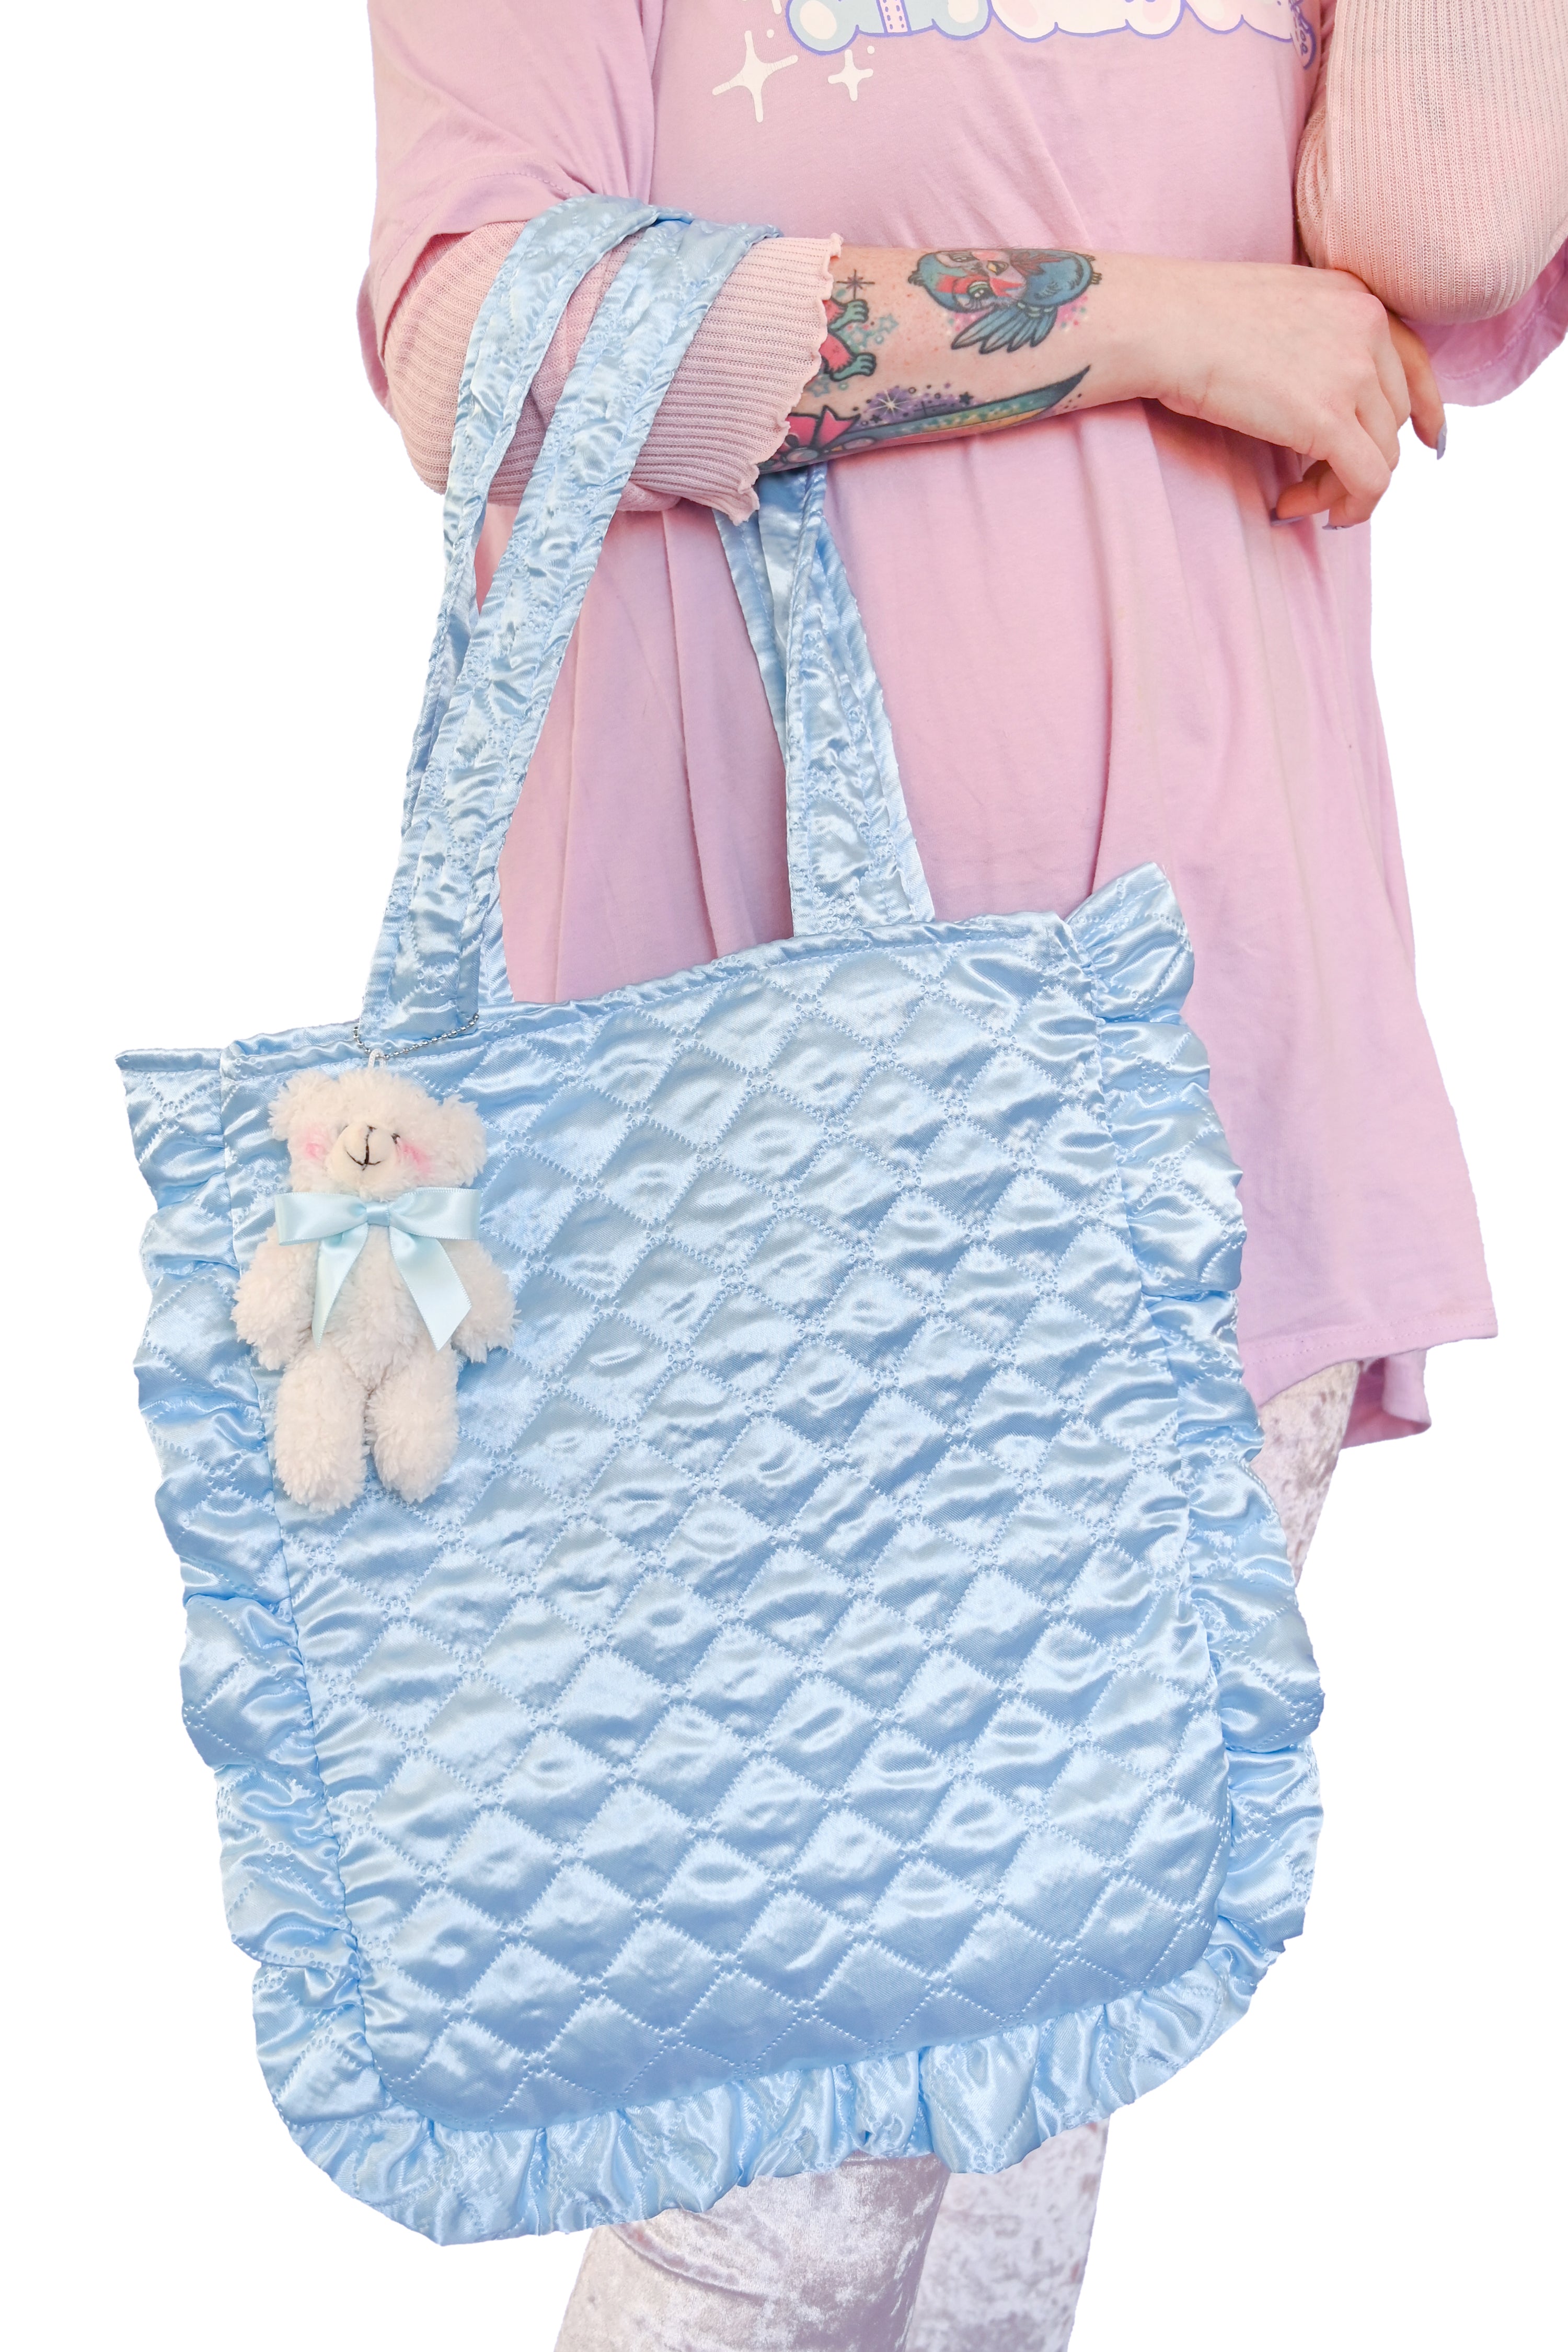 soft quilted blue satin tote bag with a chunky ruffled edge and a removable small white teddy bear with a blue ribbon bow tie